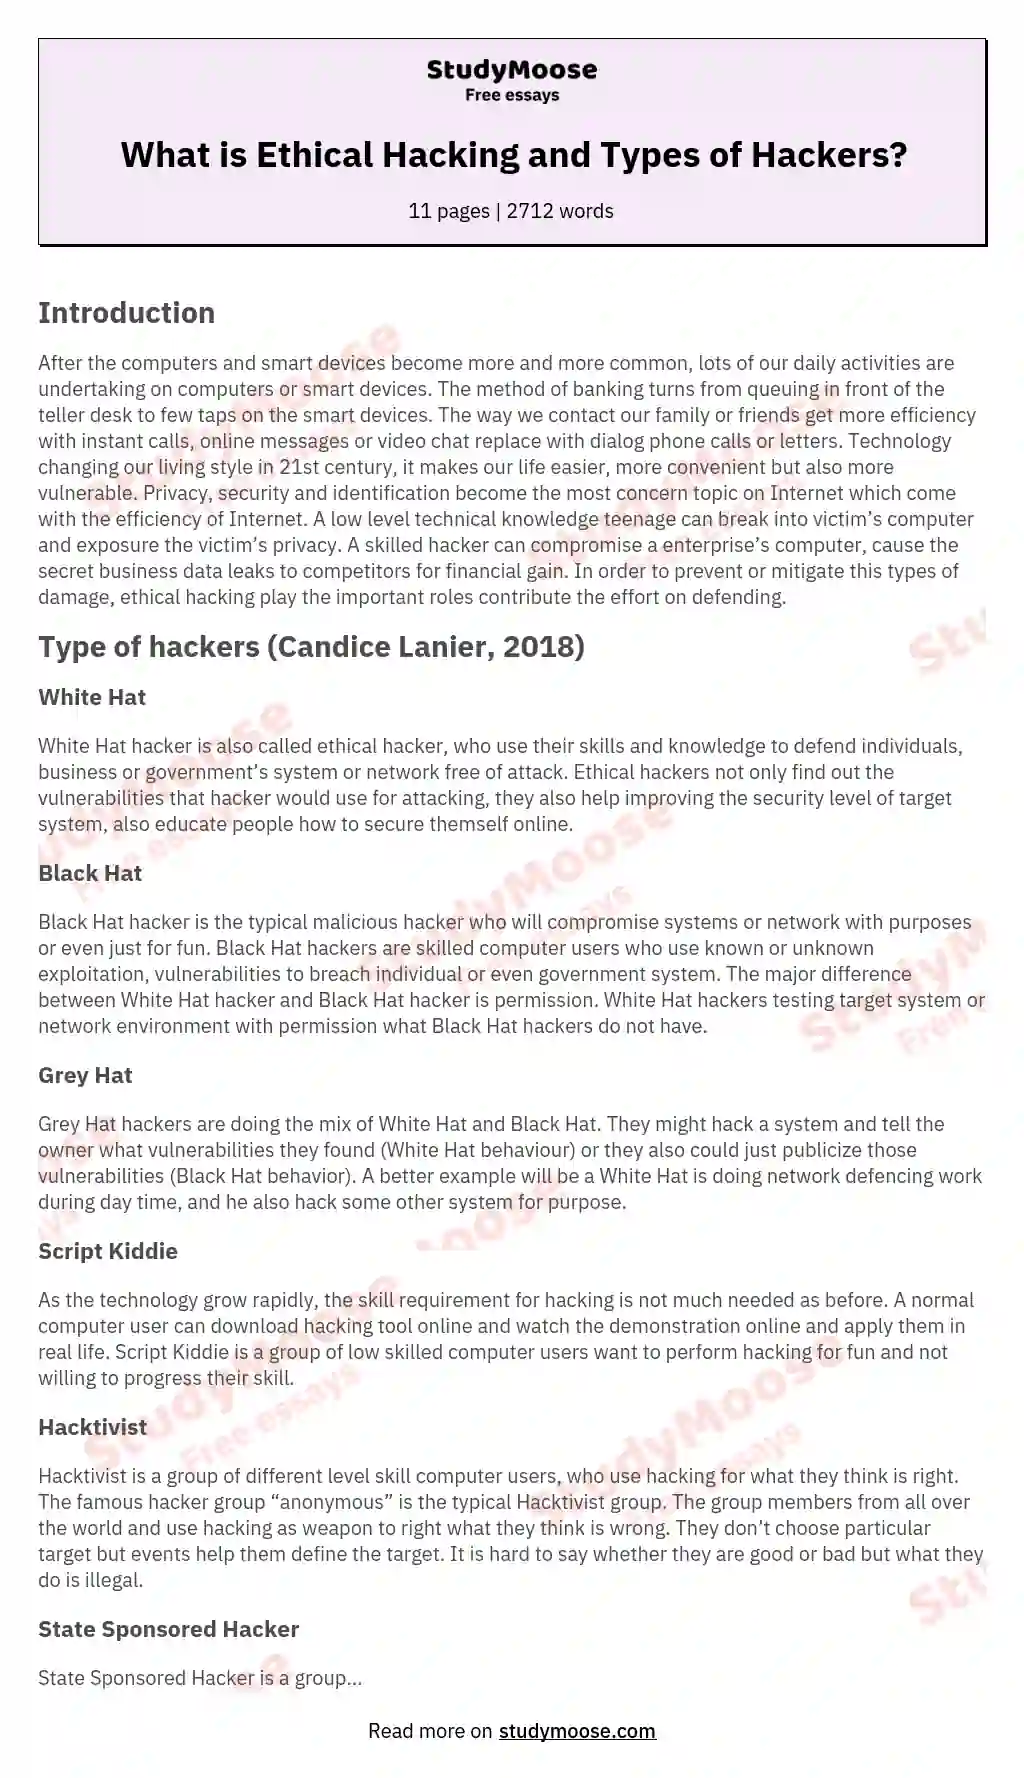 What is Ethical Hacking and Types of Hackers? essay